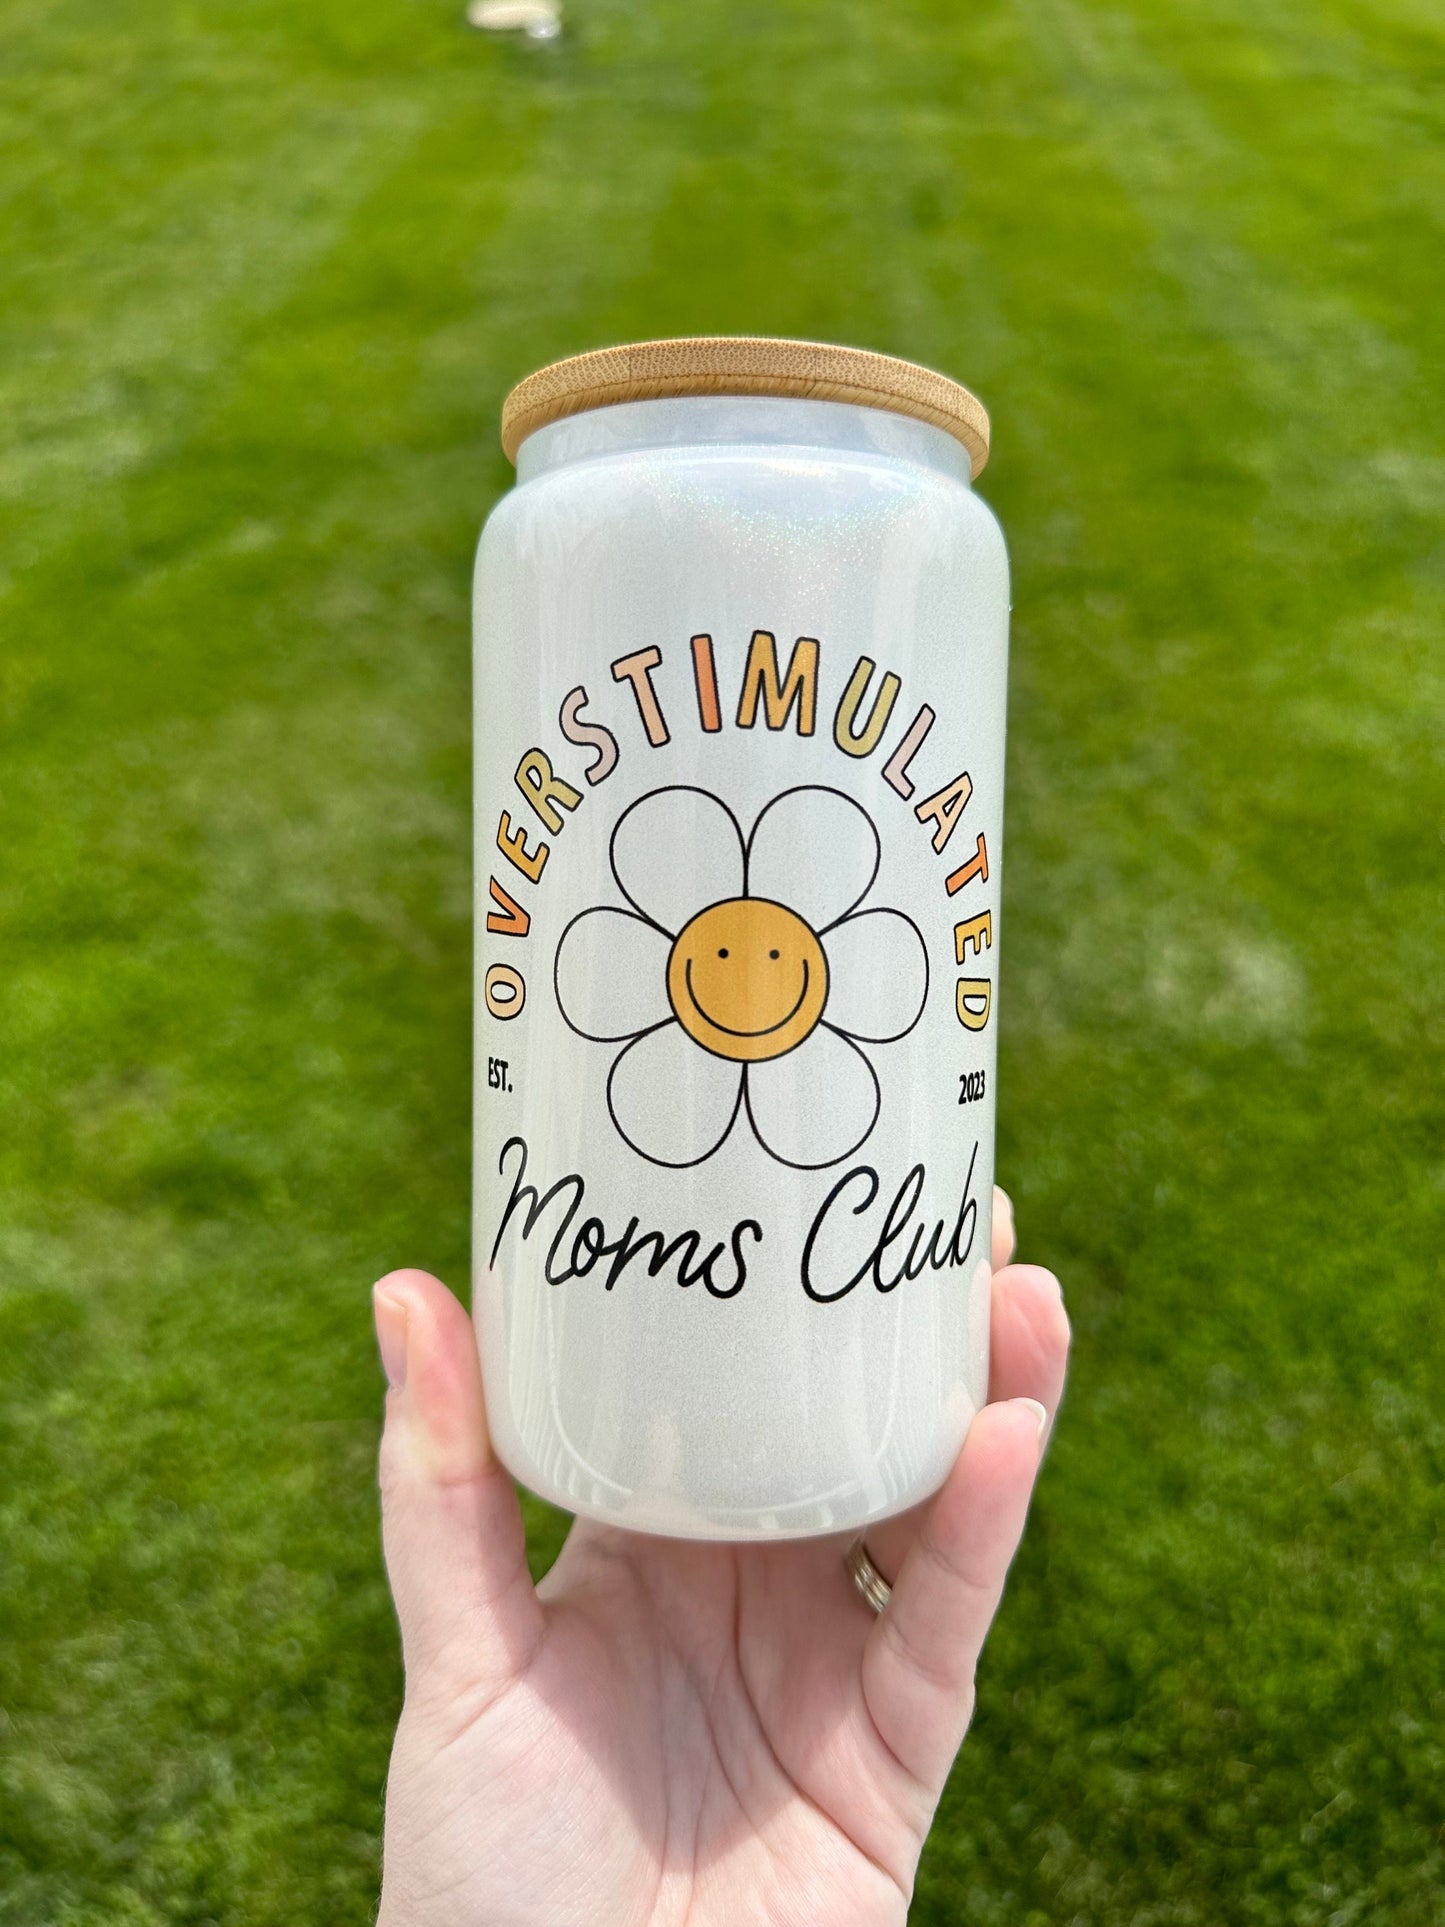 Overstimulated Moms Club Glass, Iced Coffee Glass, Iced Coffee Cup, Glass Coffee Cup, Gift Ideas for Women, Gifts for Her, Mothers Day Gift